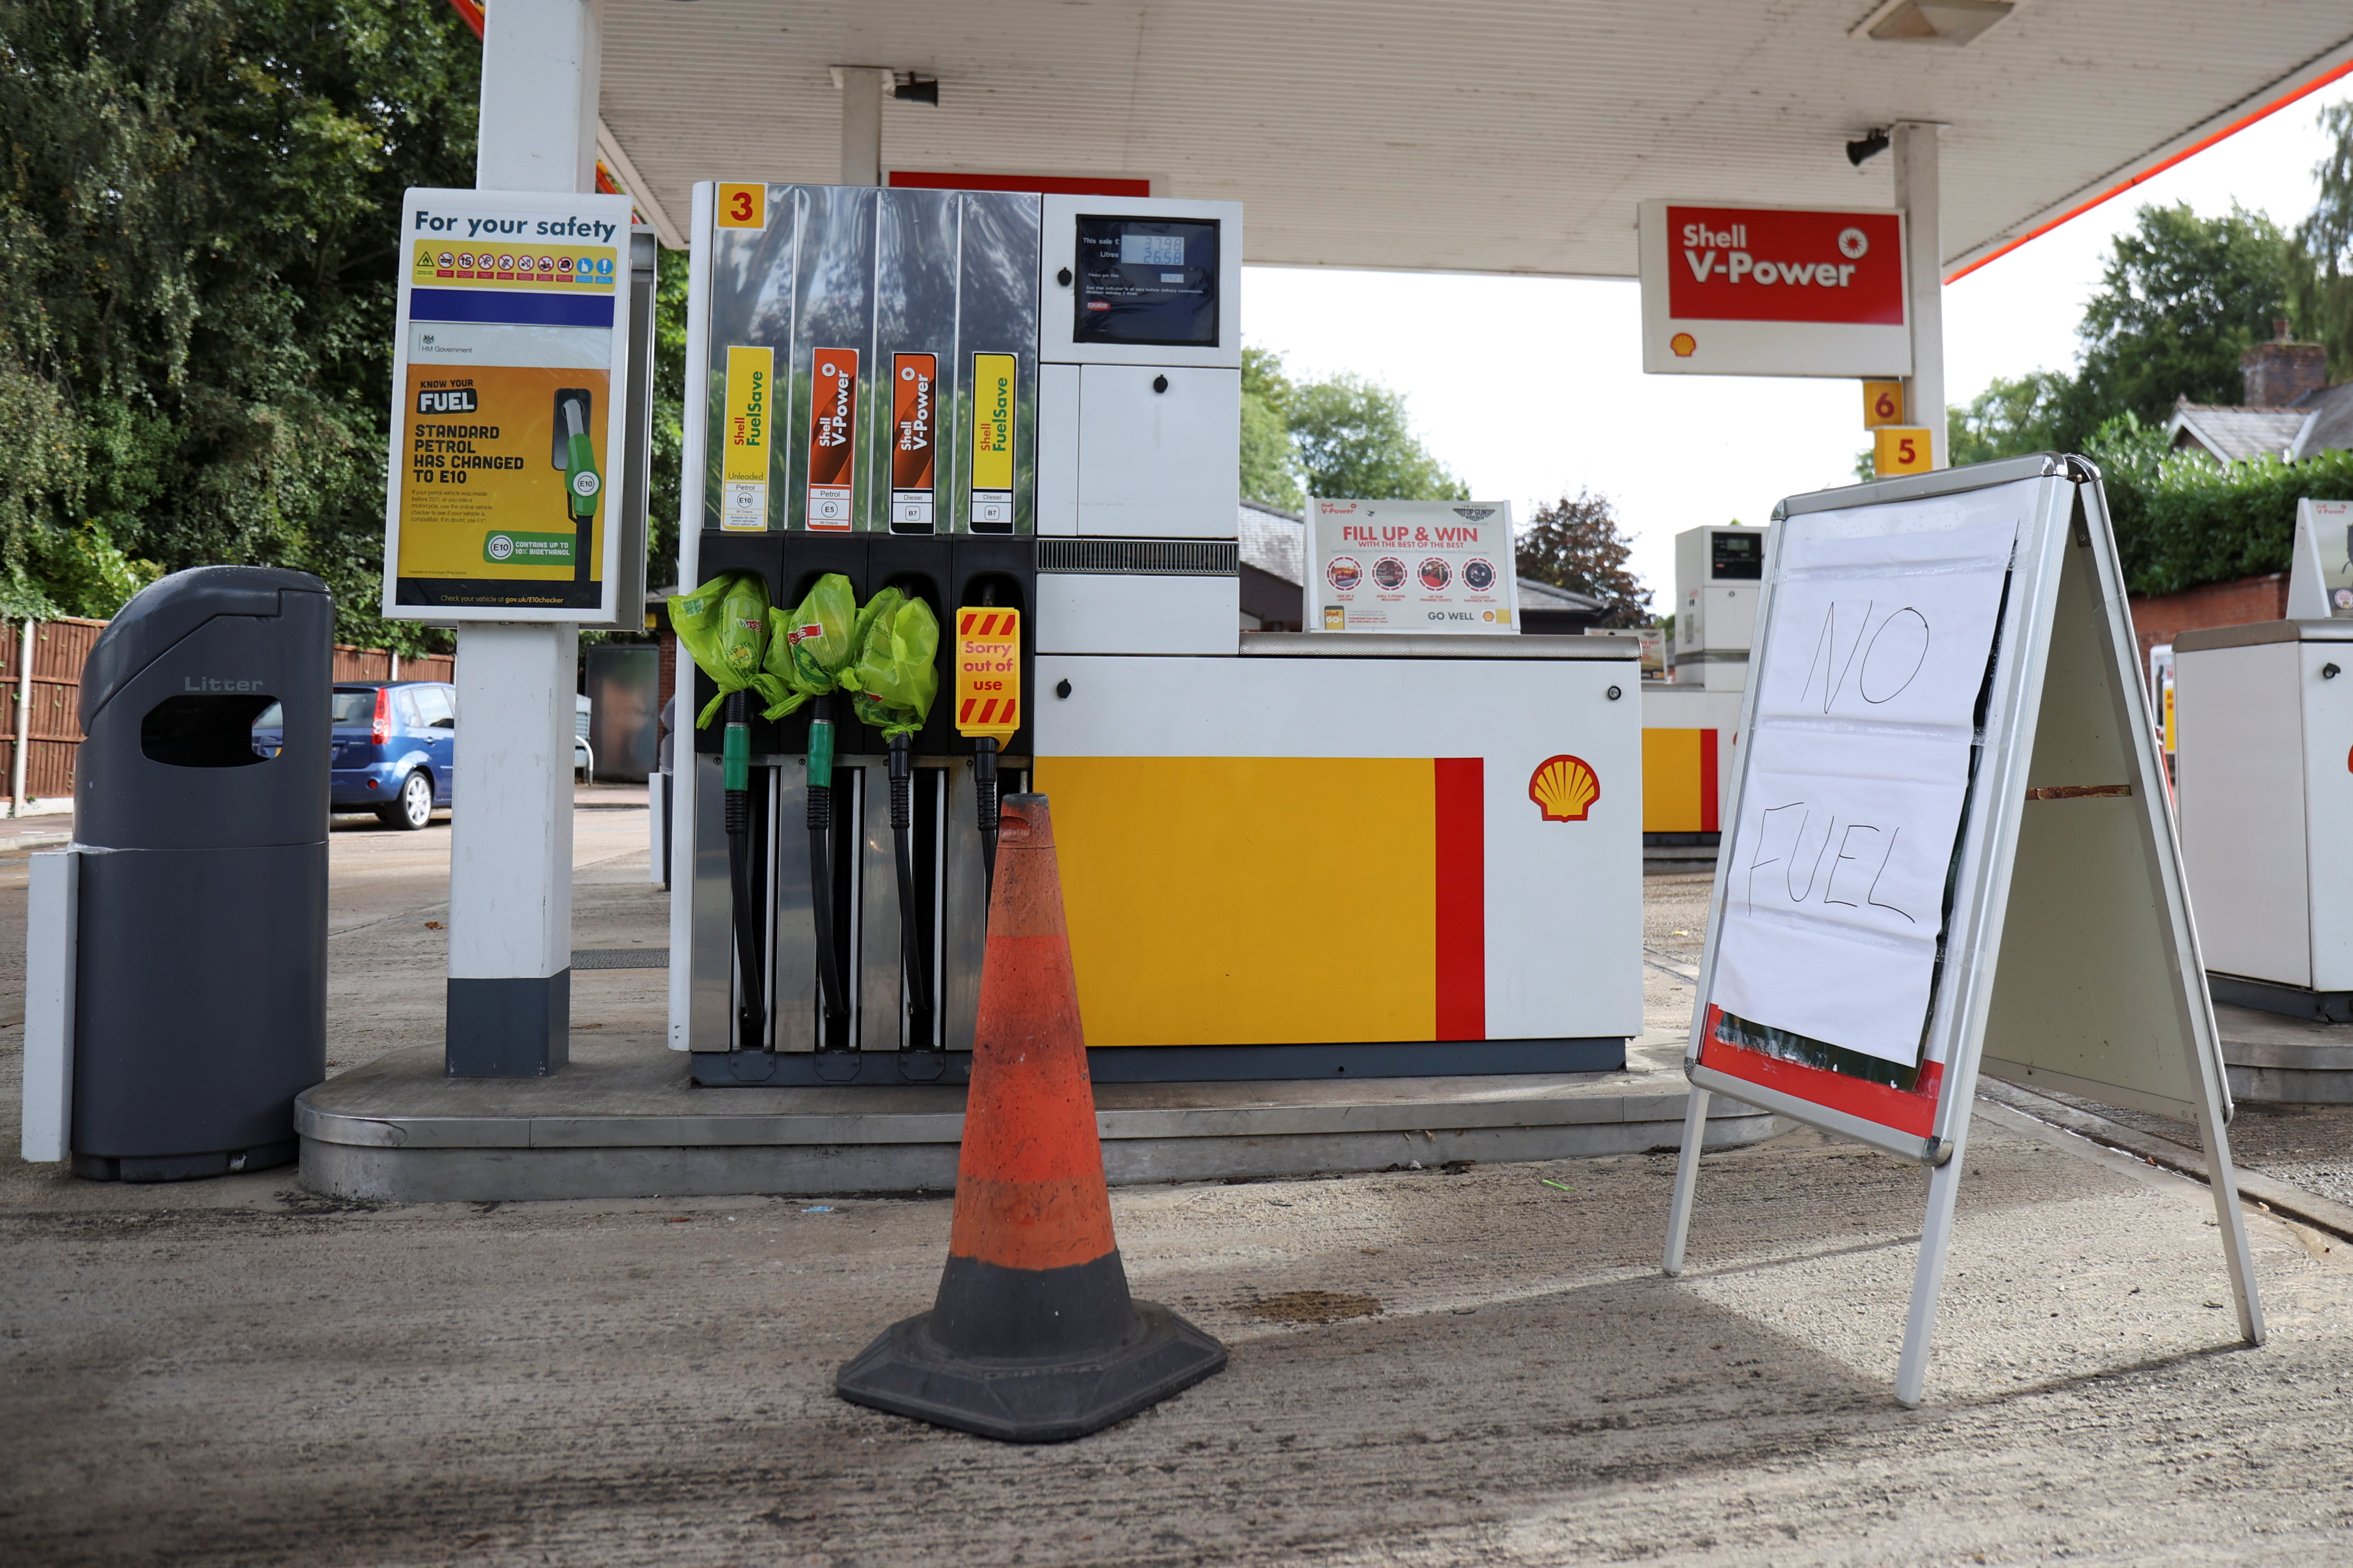 A Shell petrol station that has run out of fuel is seen in Northwich